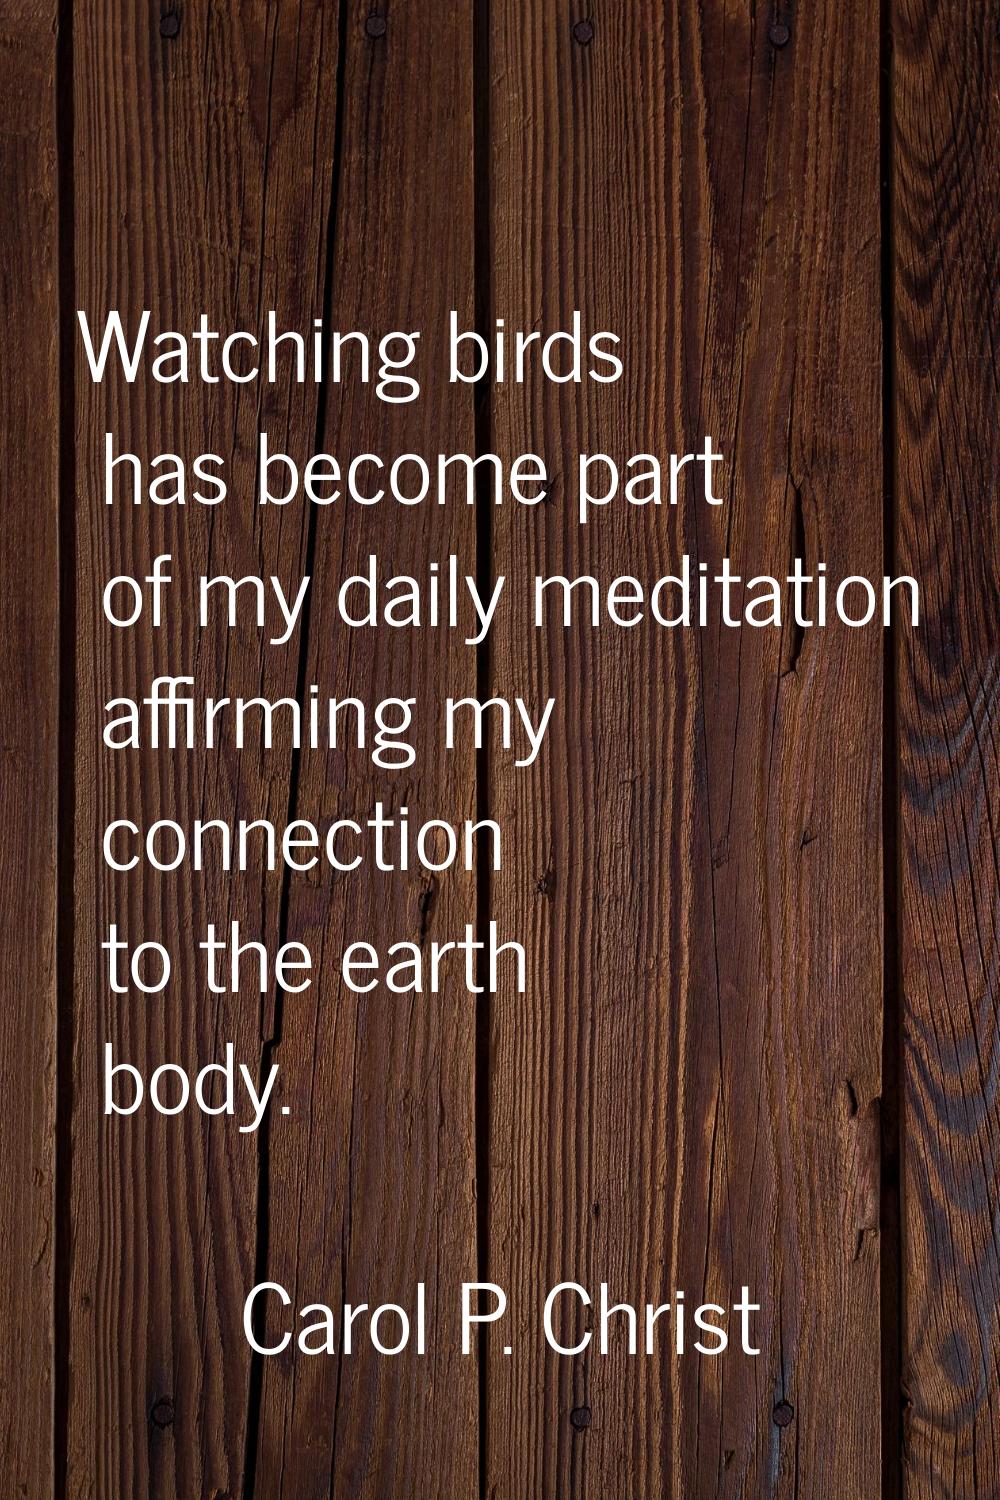 Watching birds has become part of my daily meditation affirming my connection to the earth body.